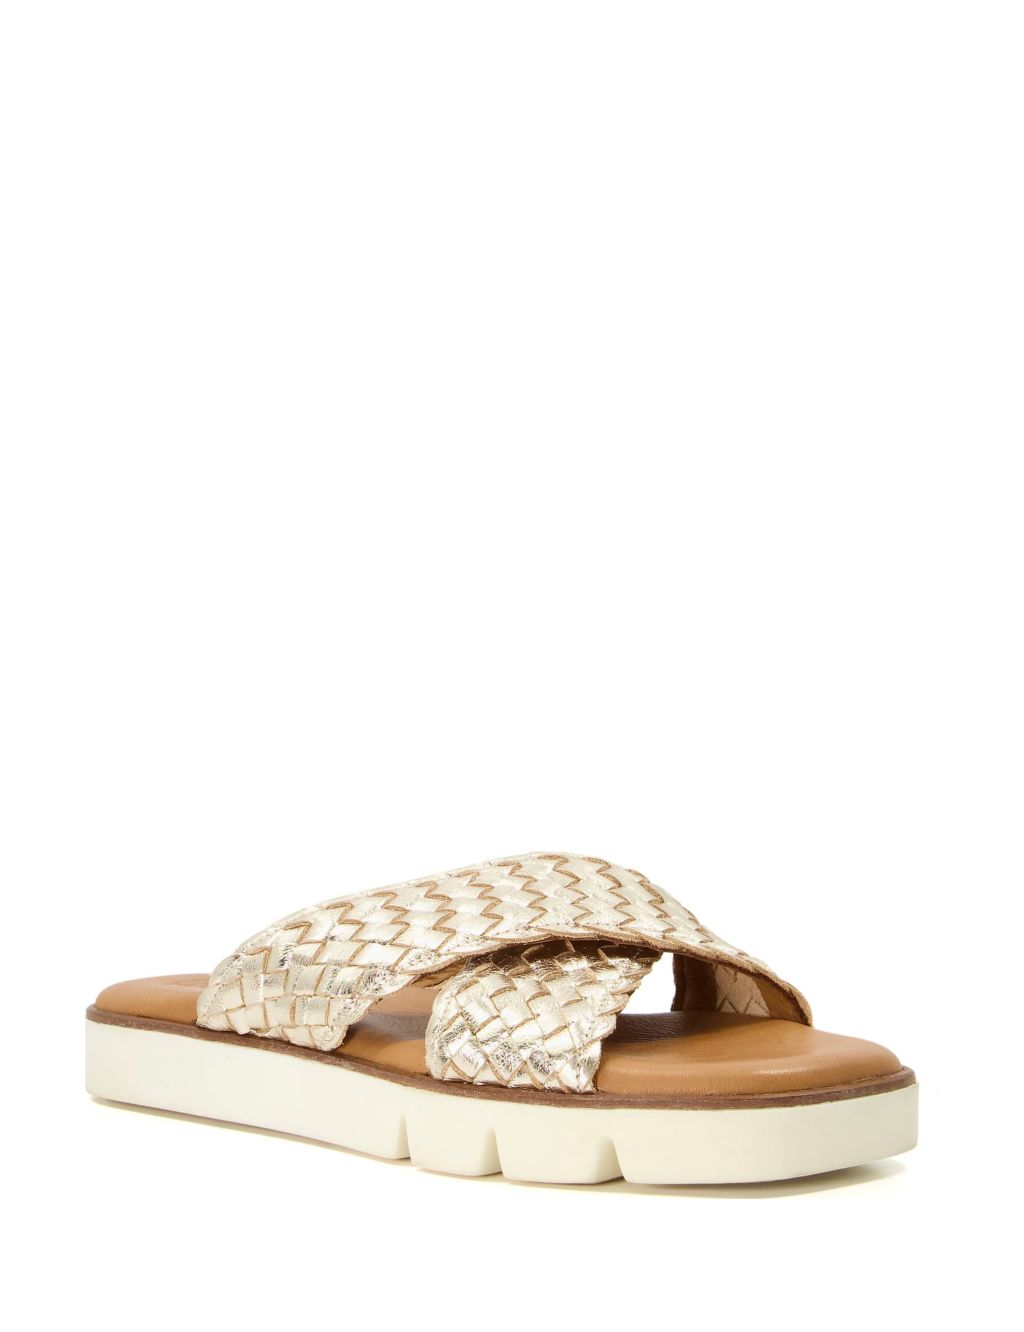 Leather Woven Crossover Flat Sliders image 2